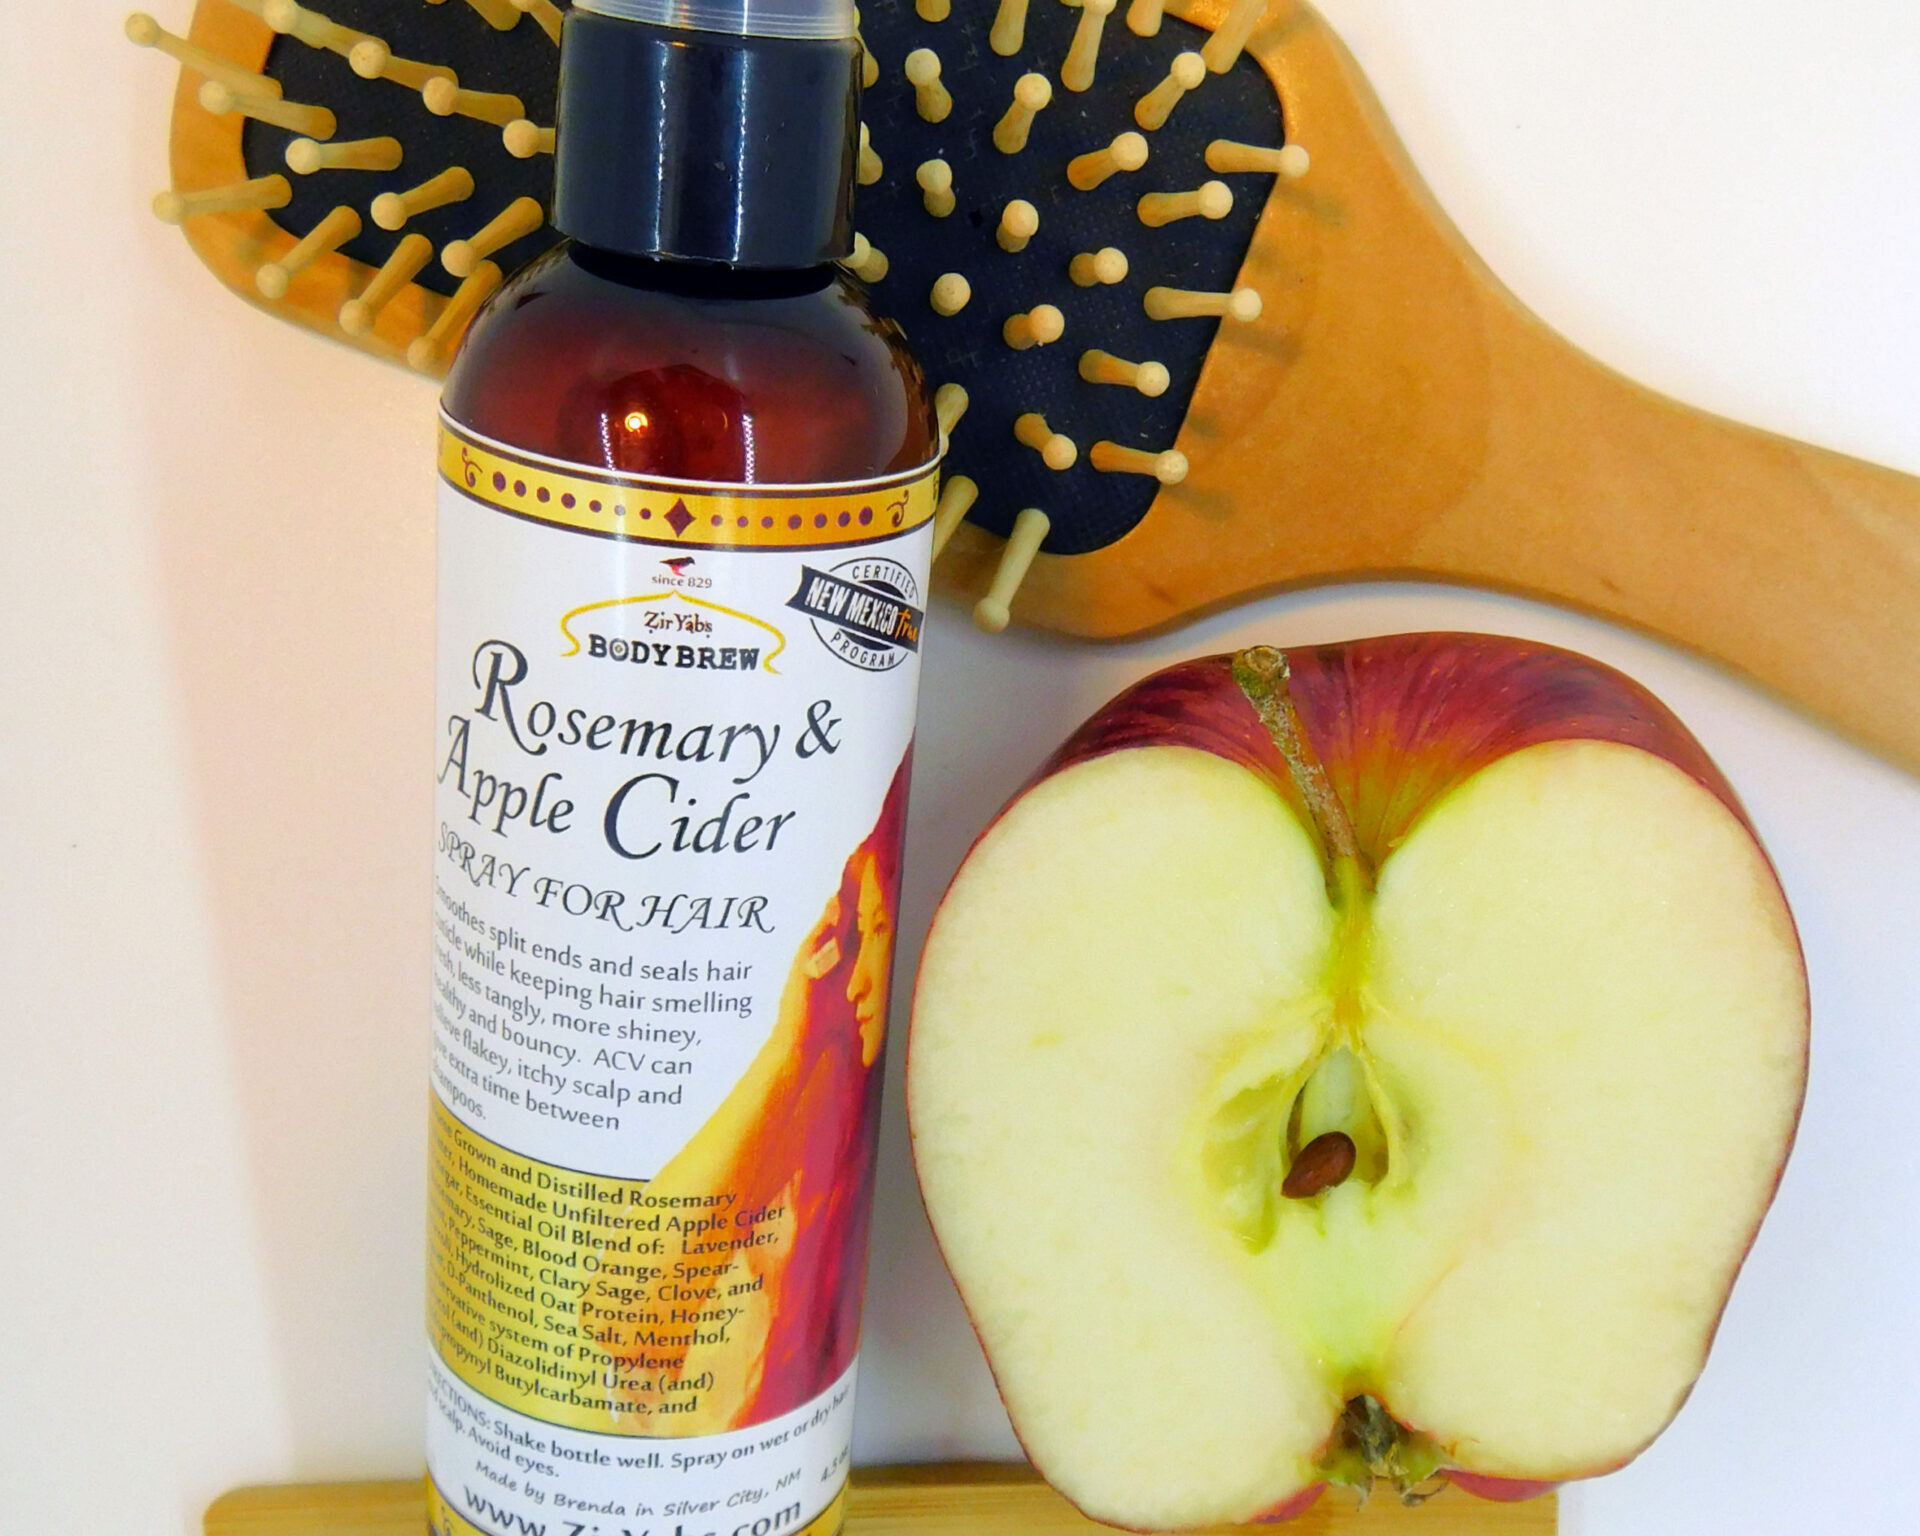 ACV HAIR SPRAY - Freshens Hair and Relieves Itchy Scalp - Ziryabs Body Brew